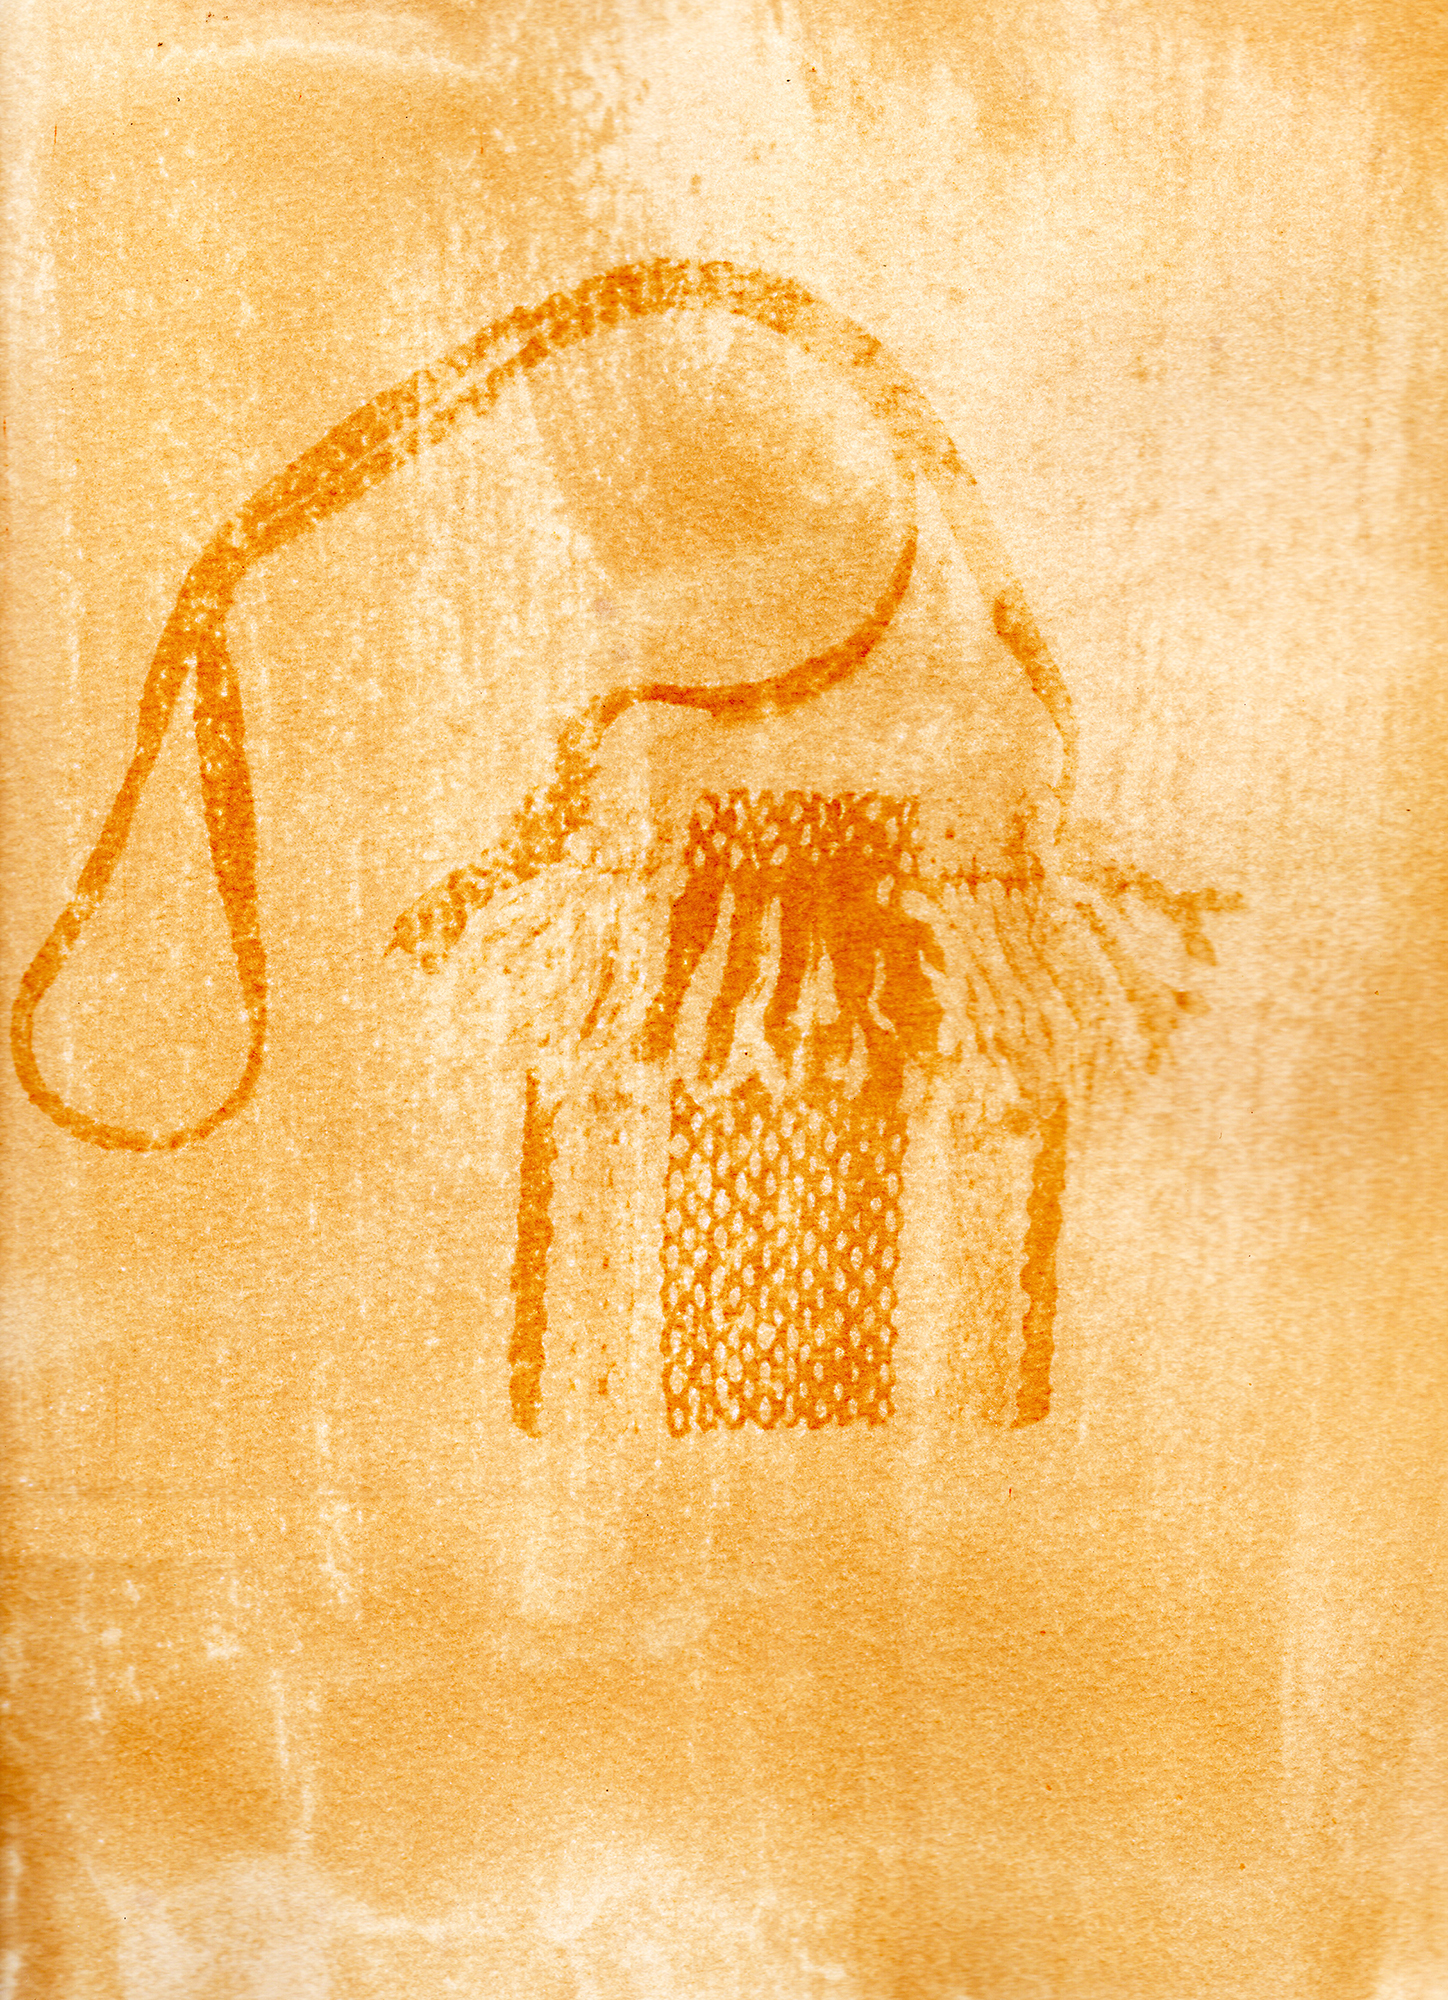  Detail of a bag made by the "Hilanderas del Fin del Mundo", a group of women dedicated to retake traditions of embroidery and weaving by invoking local production against the advance of imports using natural raw materials produced in the island. Sca